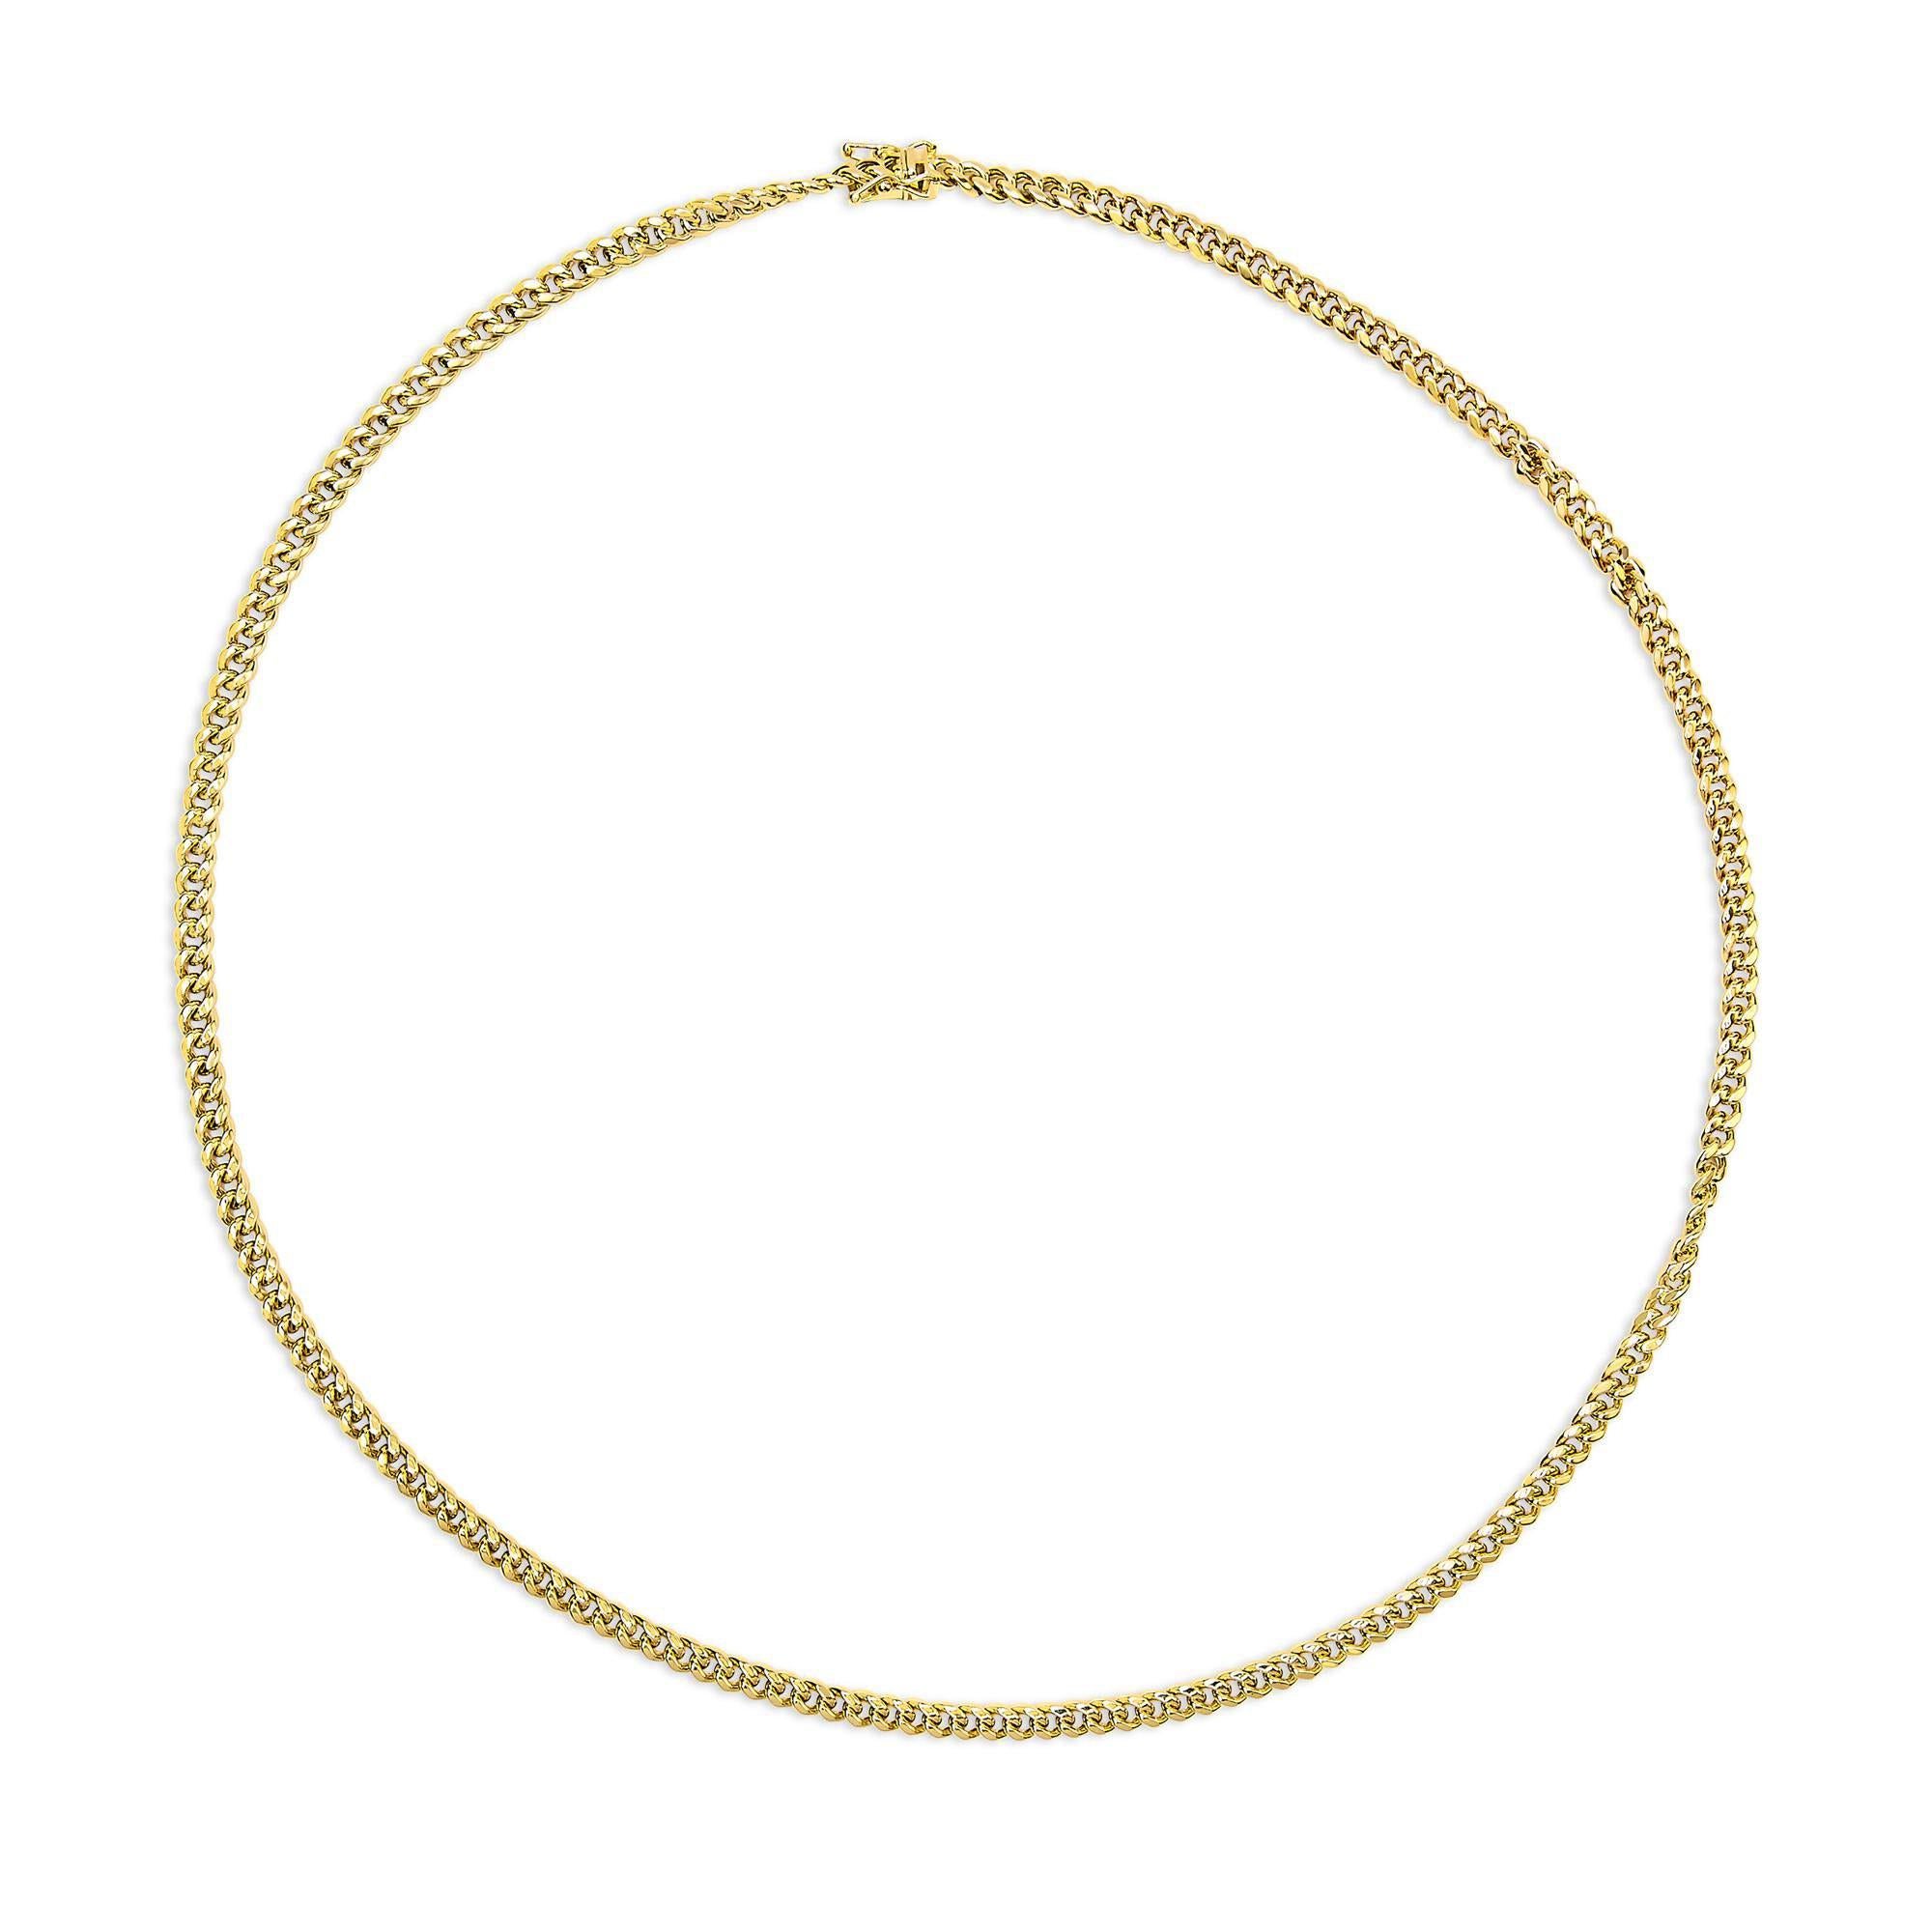 14K Yellow Gold Cuban Chain Necklace 22 Inches In Excellent Condition For Sale In Laguna Niguel, CA